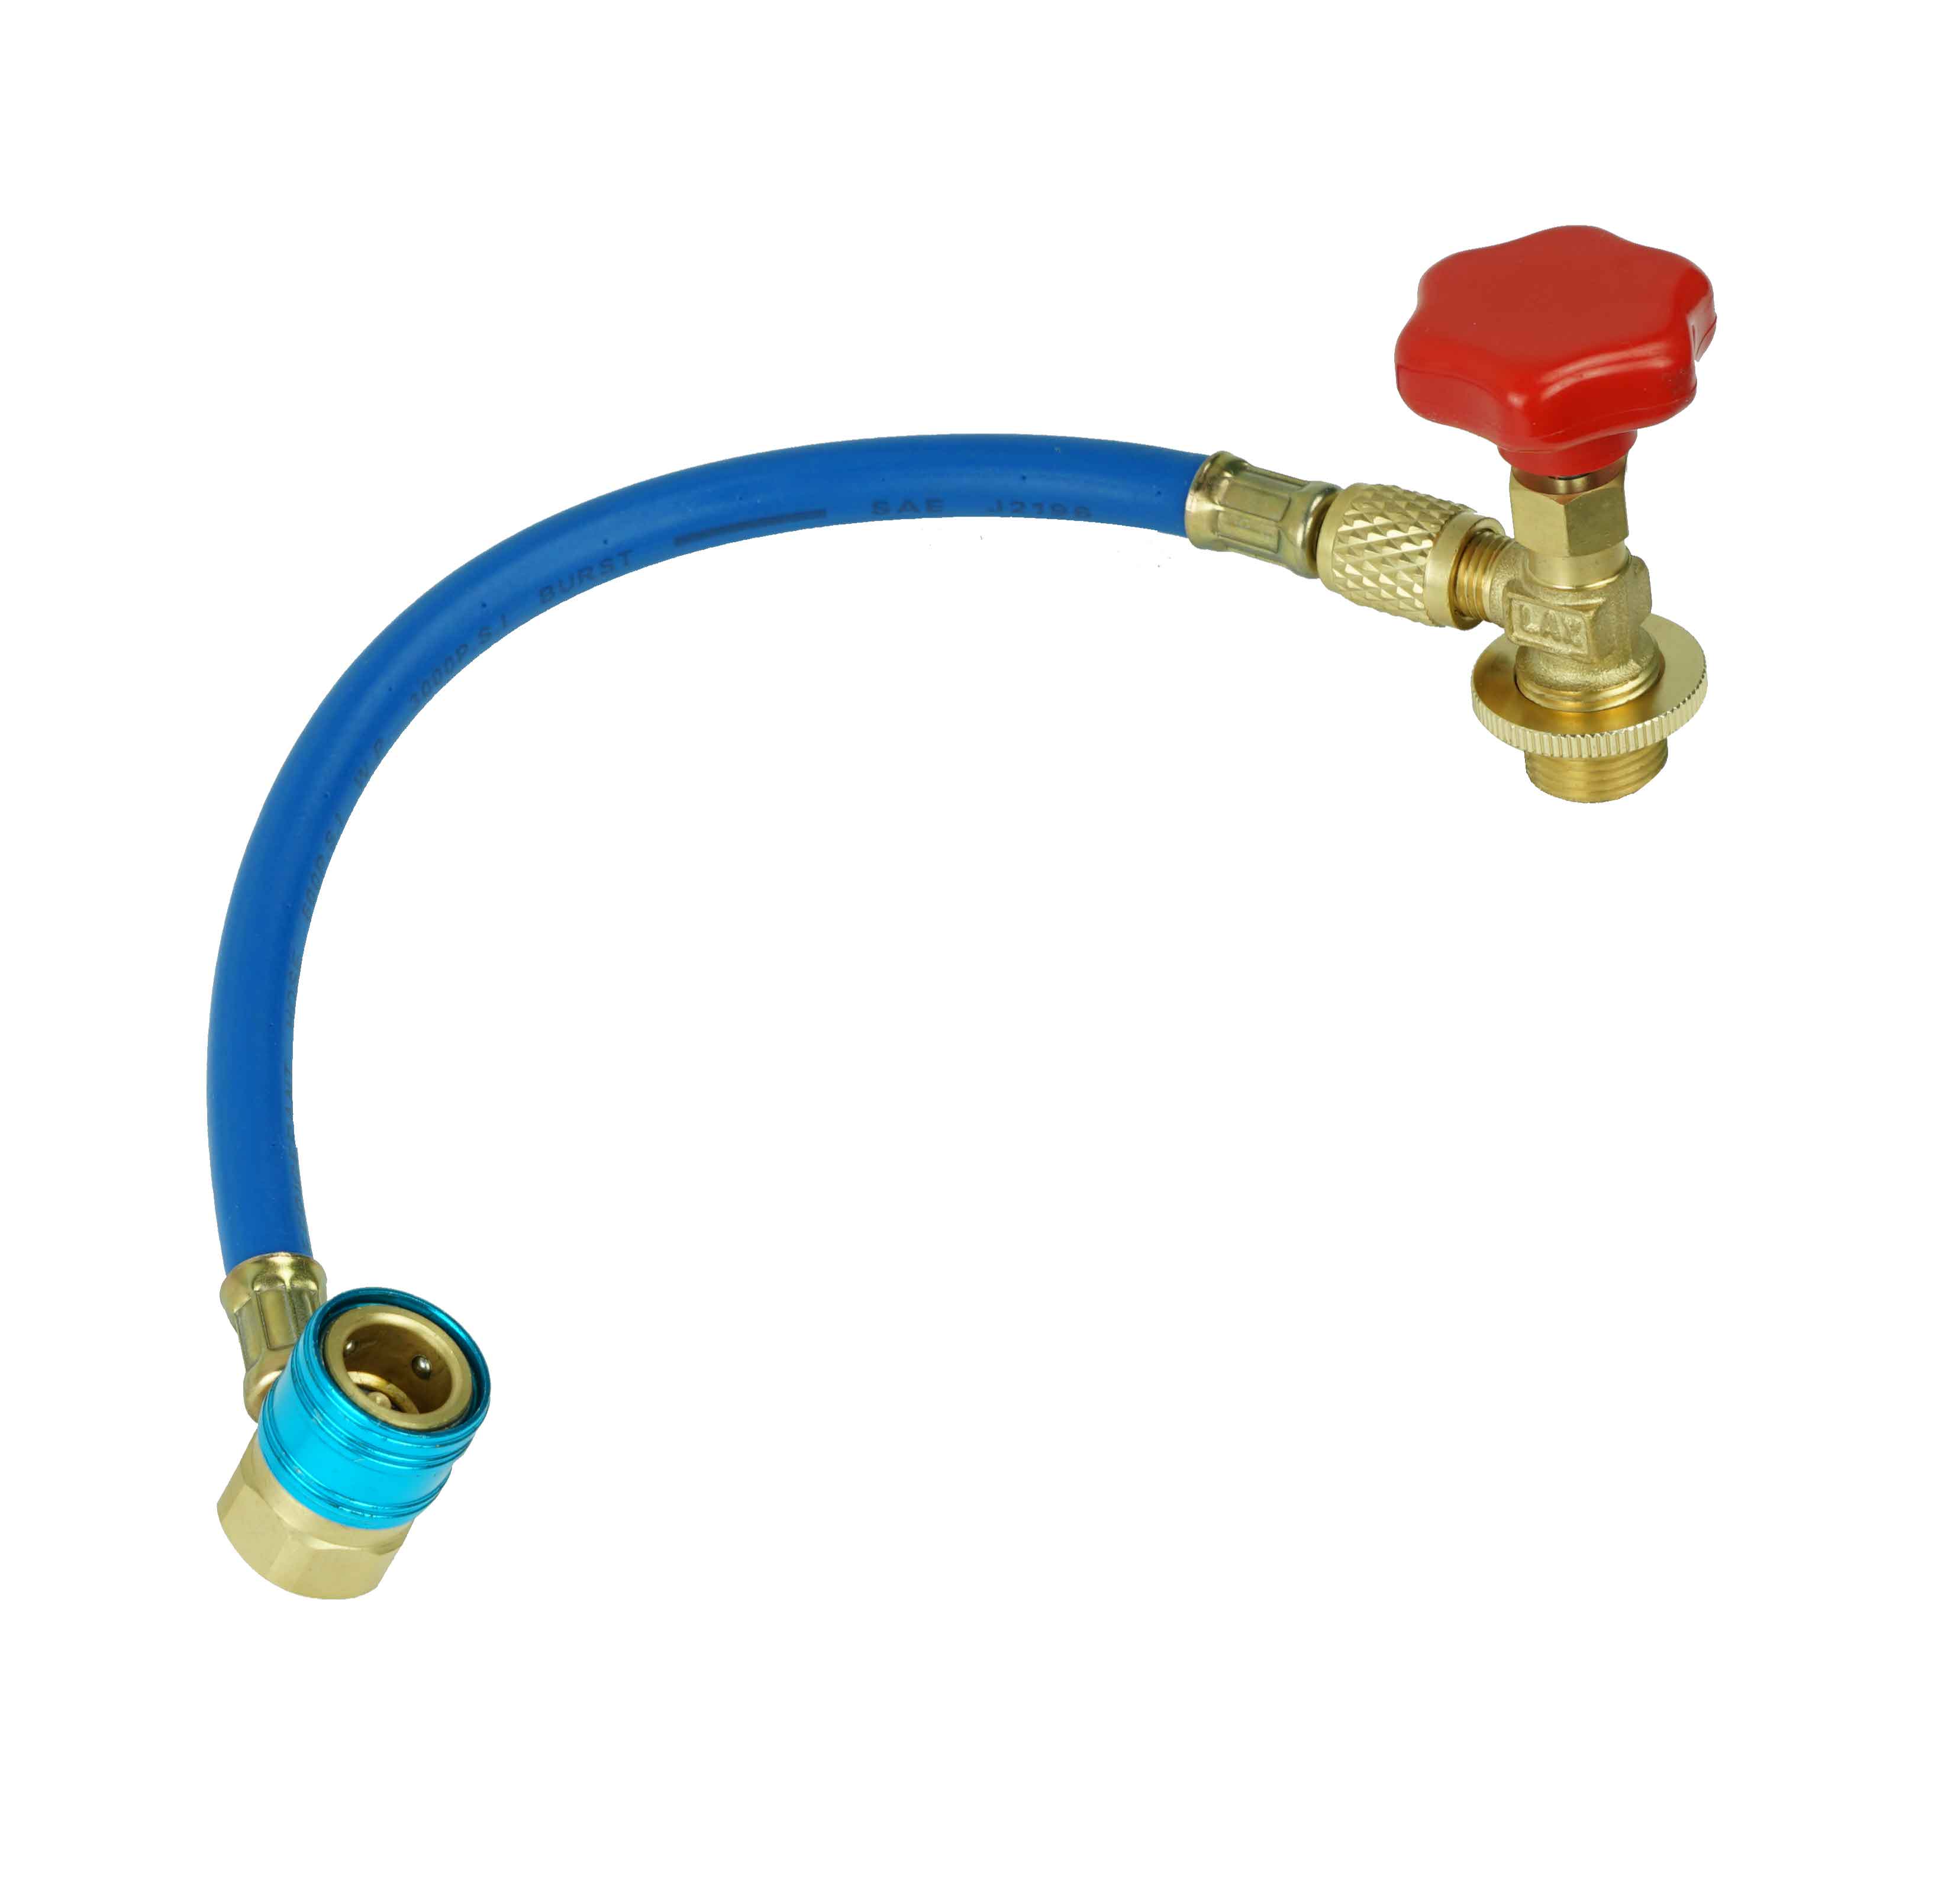 58178 - Gas-charge-kit-with-can-opener-valve-for-134a-Gas-can-connection-M14-x-1-25